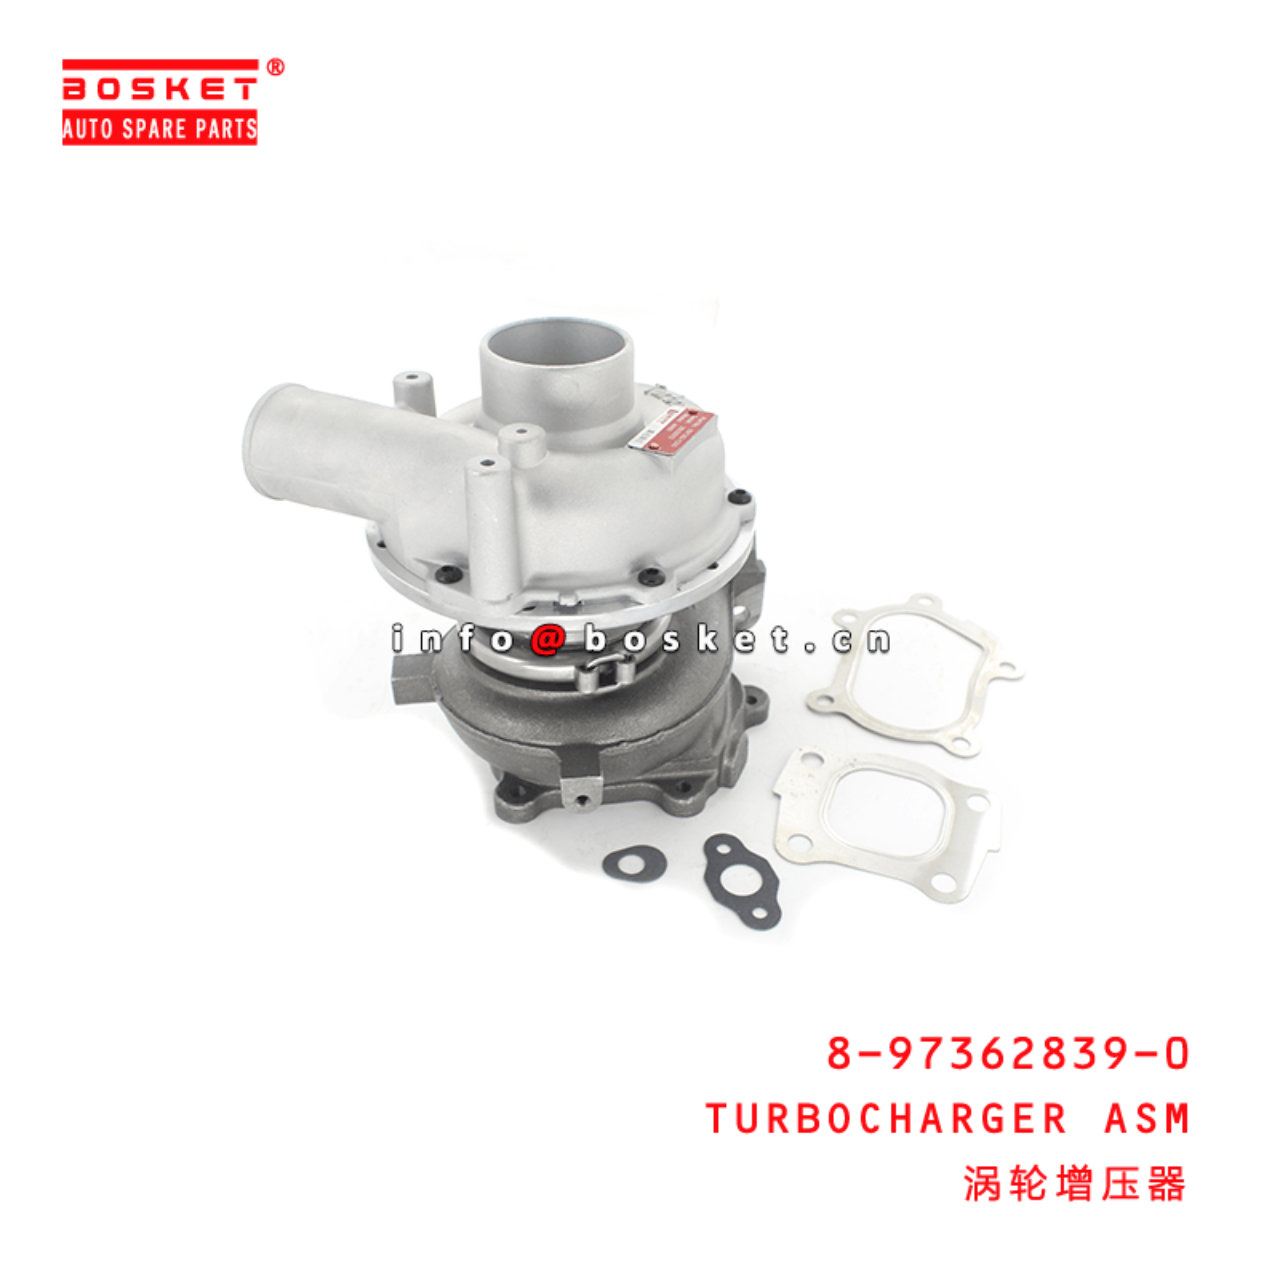 8-97362839-0 Turbocharger Assembly 8973628390 Suitable for ISUZU XD 4HK1